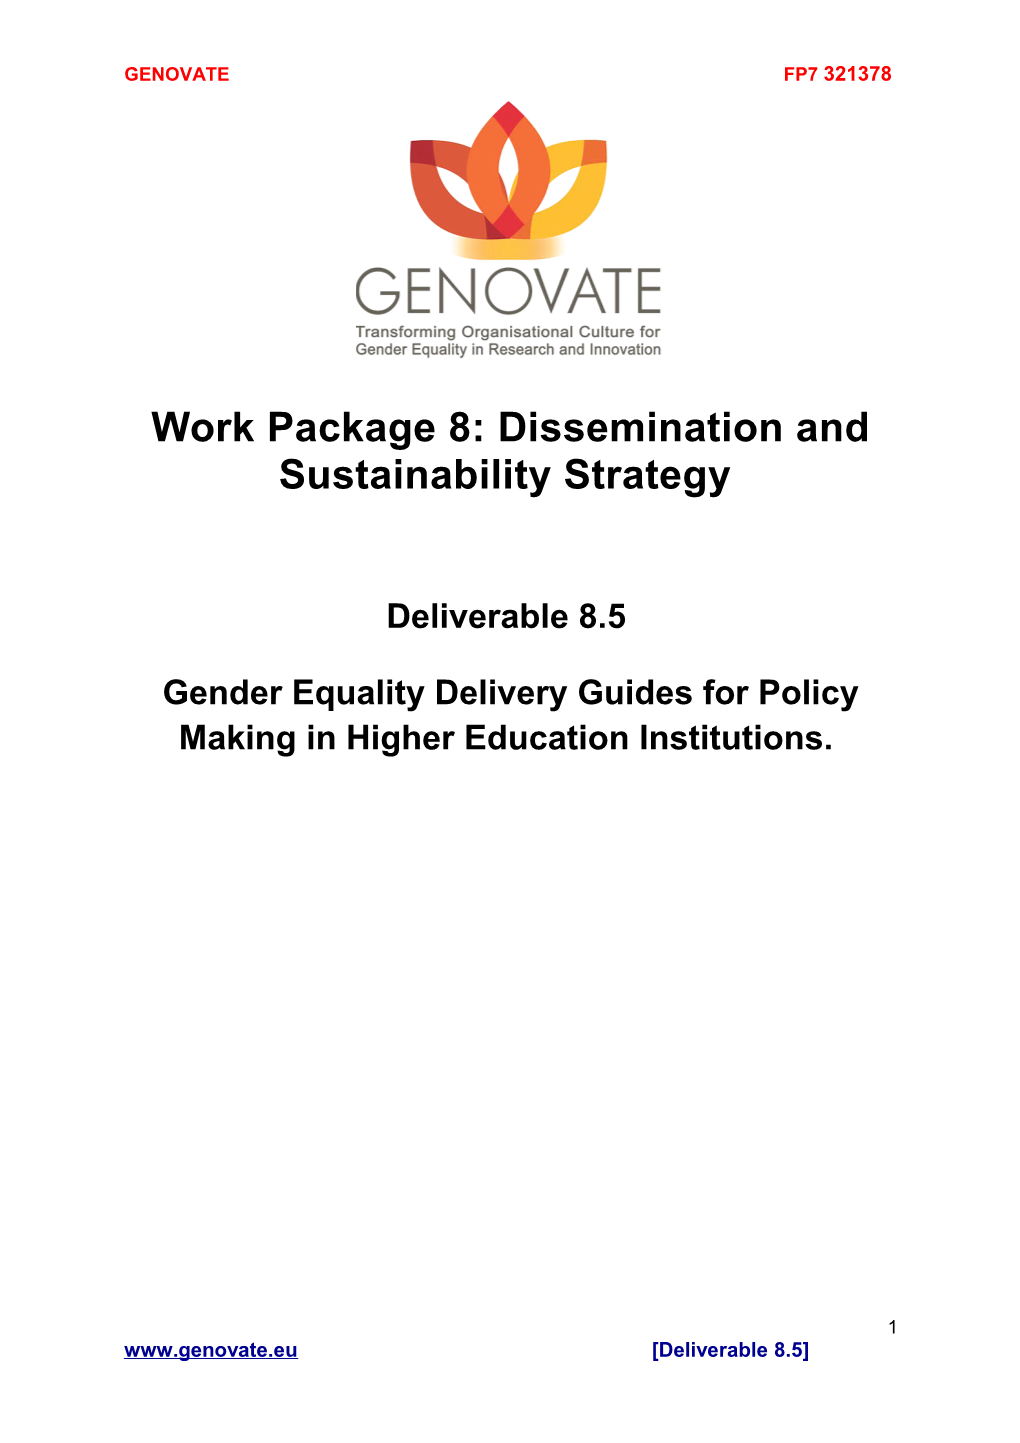 Work Package 8: Dissemination and Sustainability Strategy